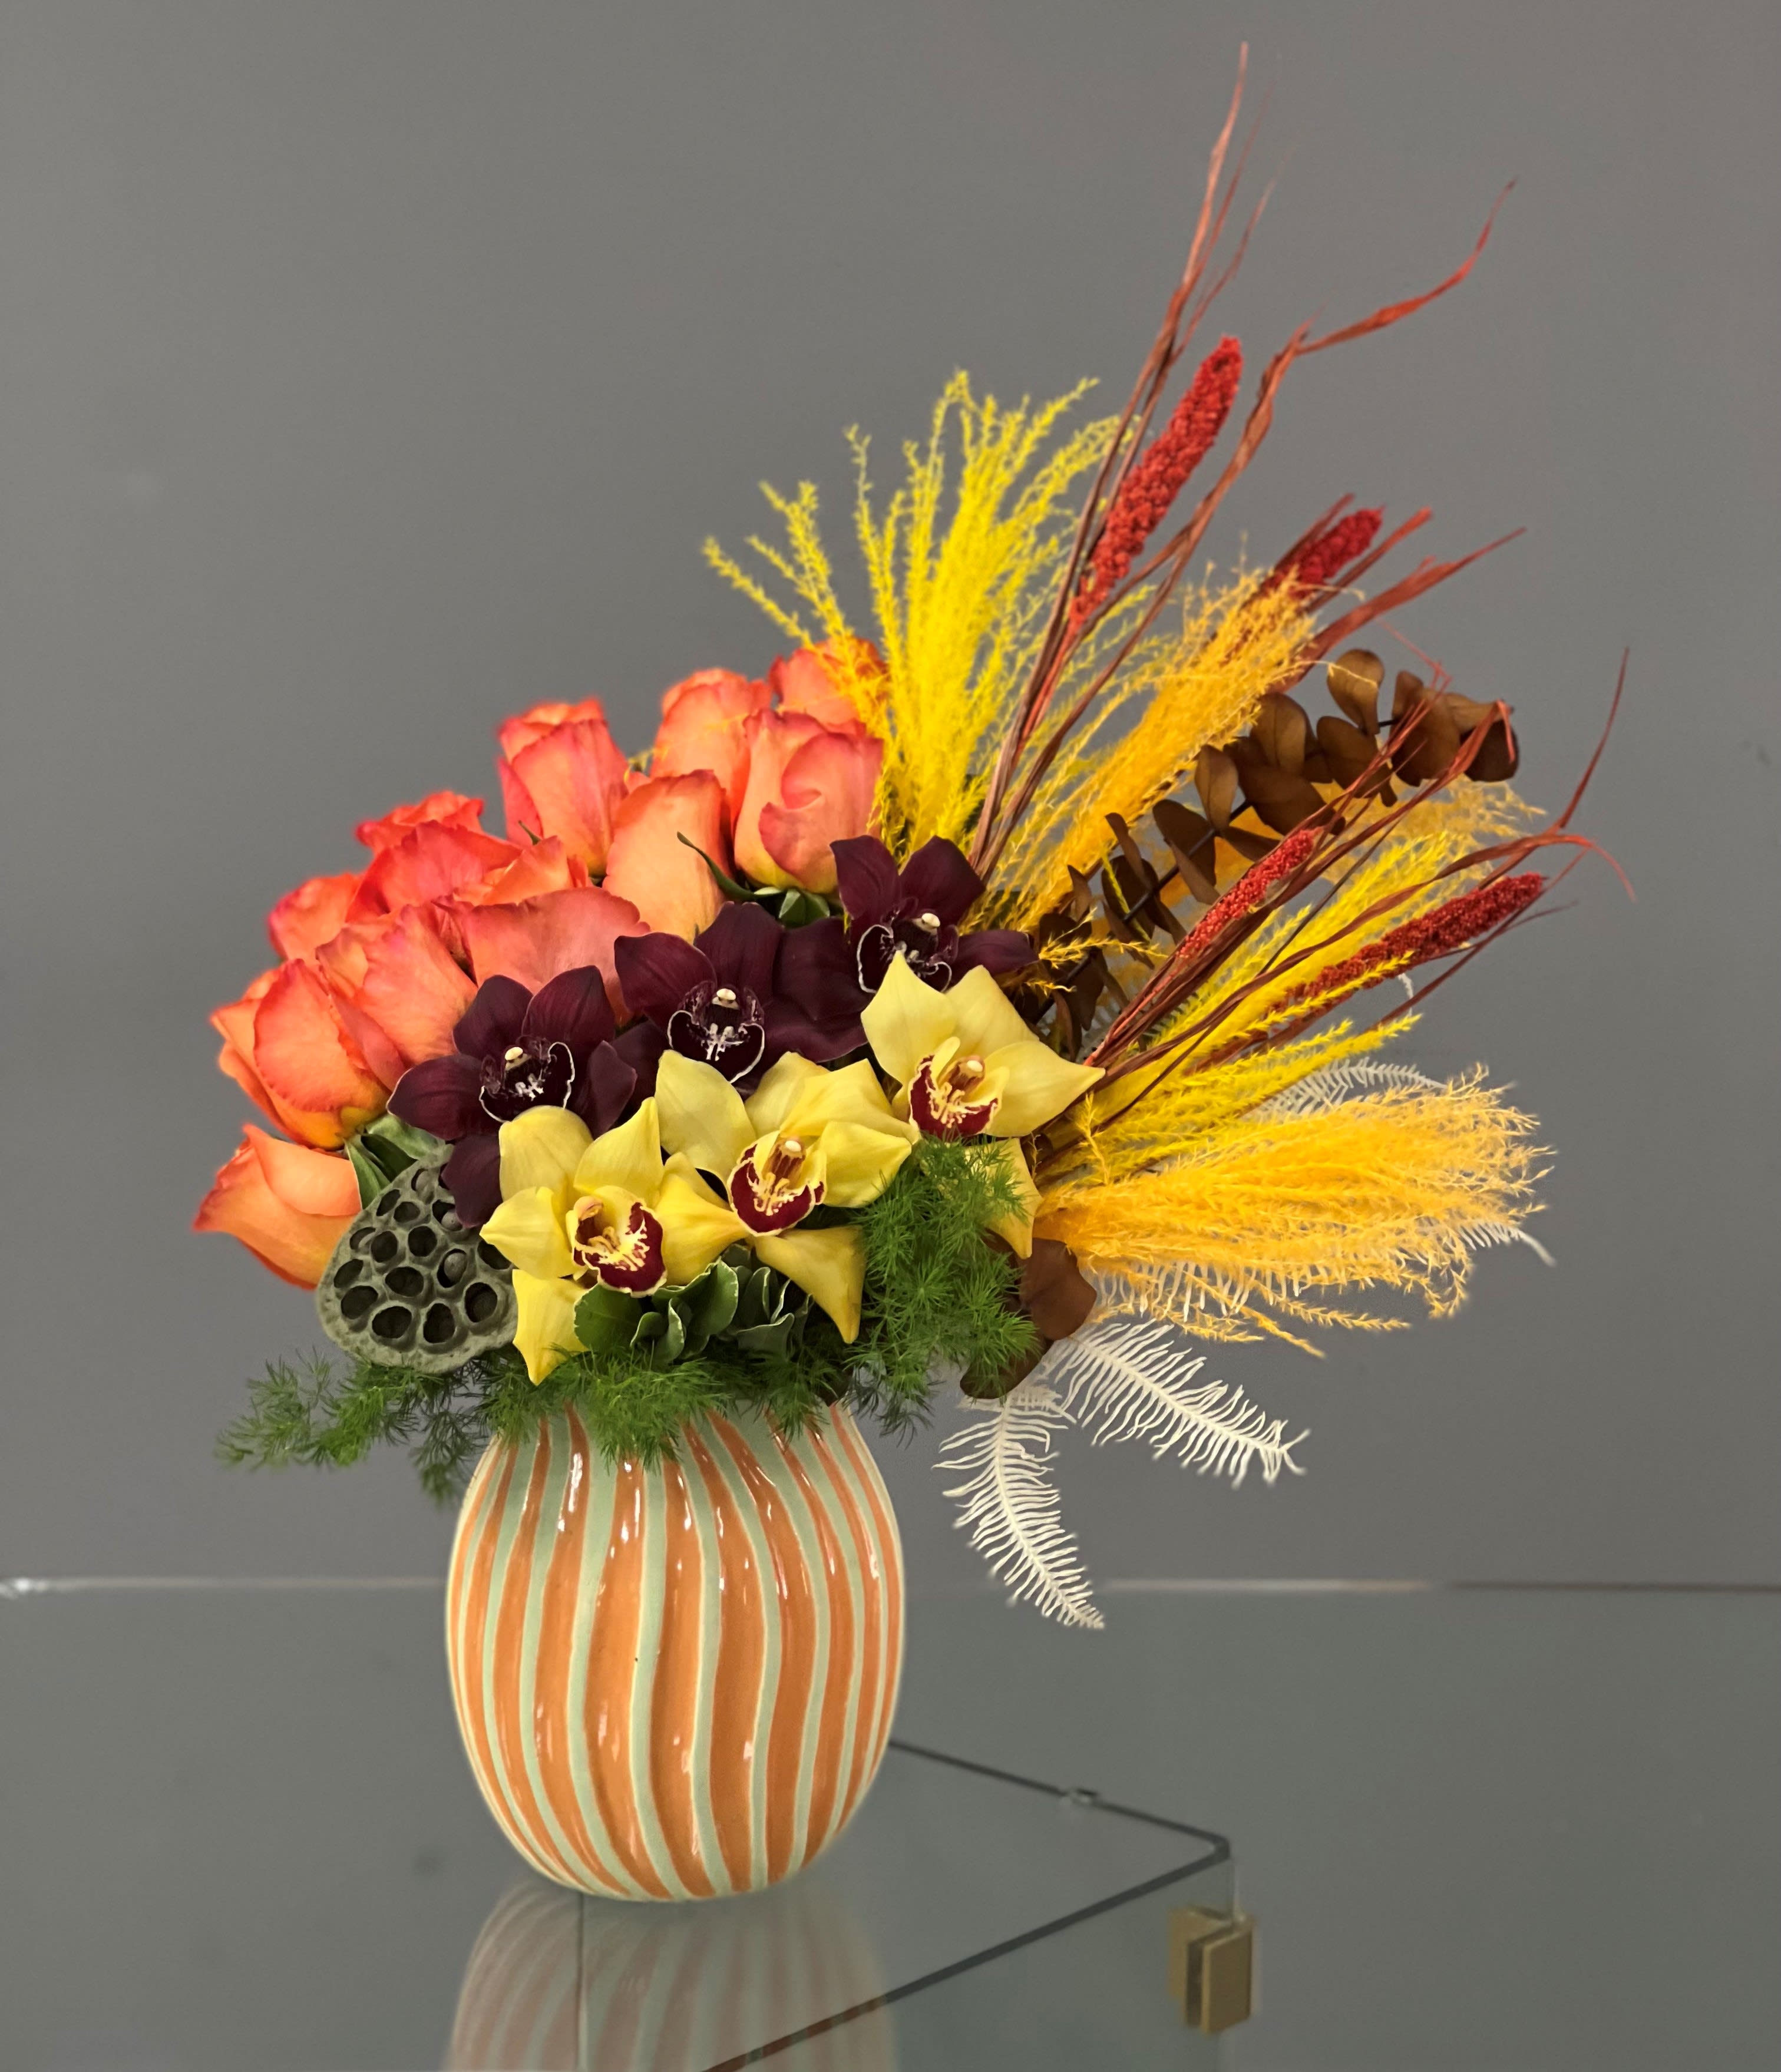 Autumn glow - This color combination express sun, warmth, and happiness. Show your exclusive taste and order this arrangement for your loved ones.